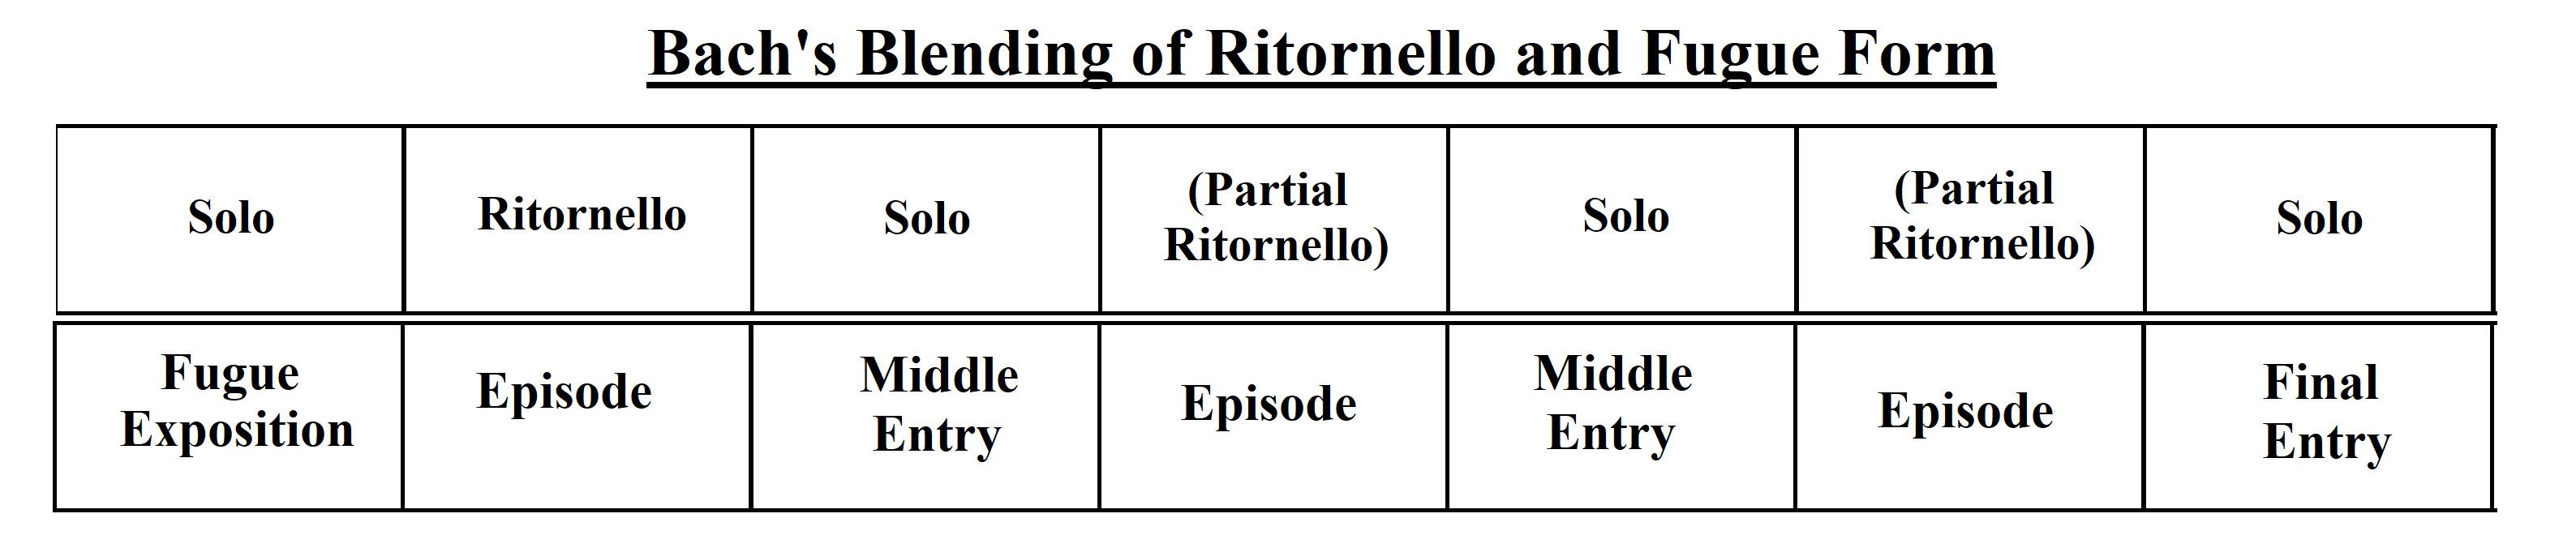 Diagram demonstrating the blend of fugue and ritornello form